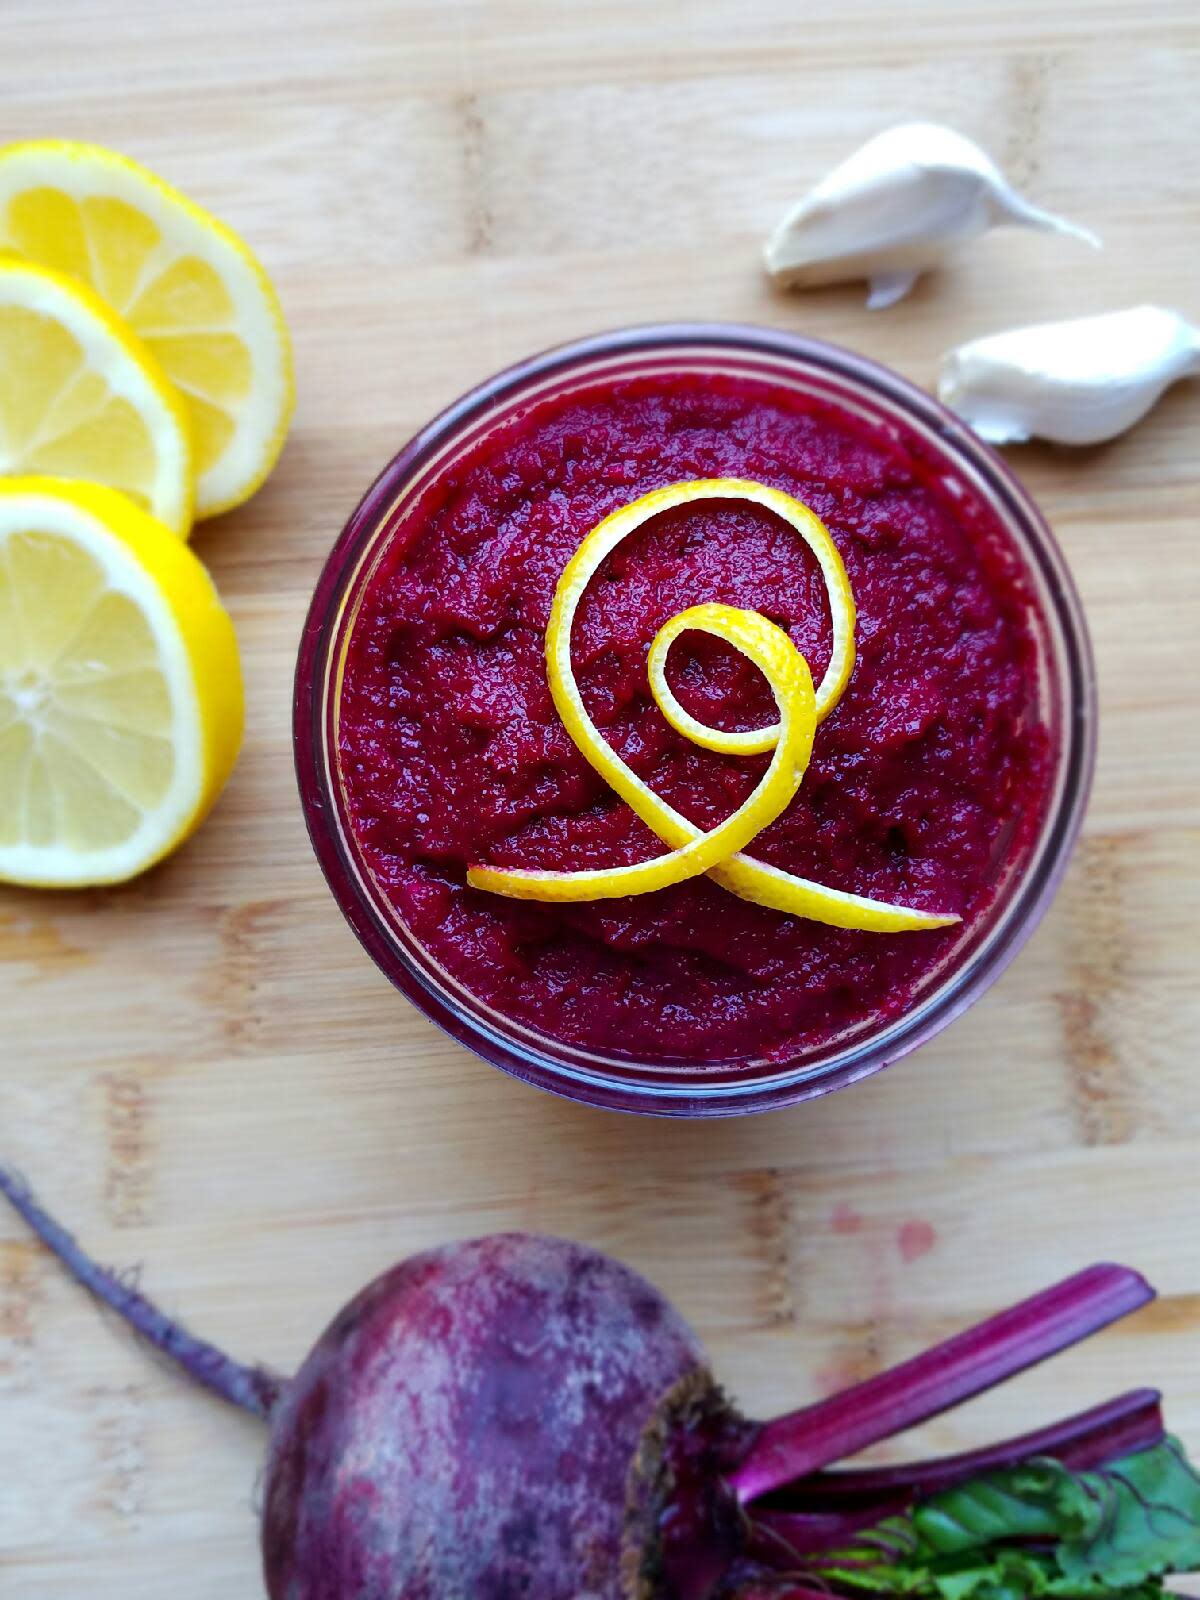 Recipes with Beets: Roasted Beet Puree with Lemon & Coriander